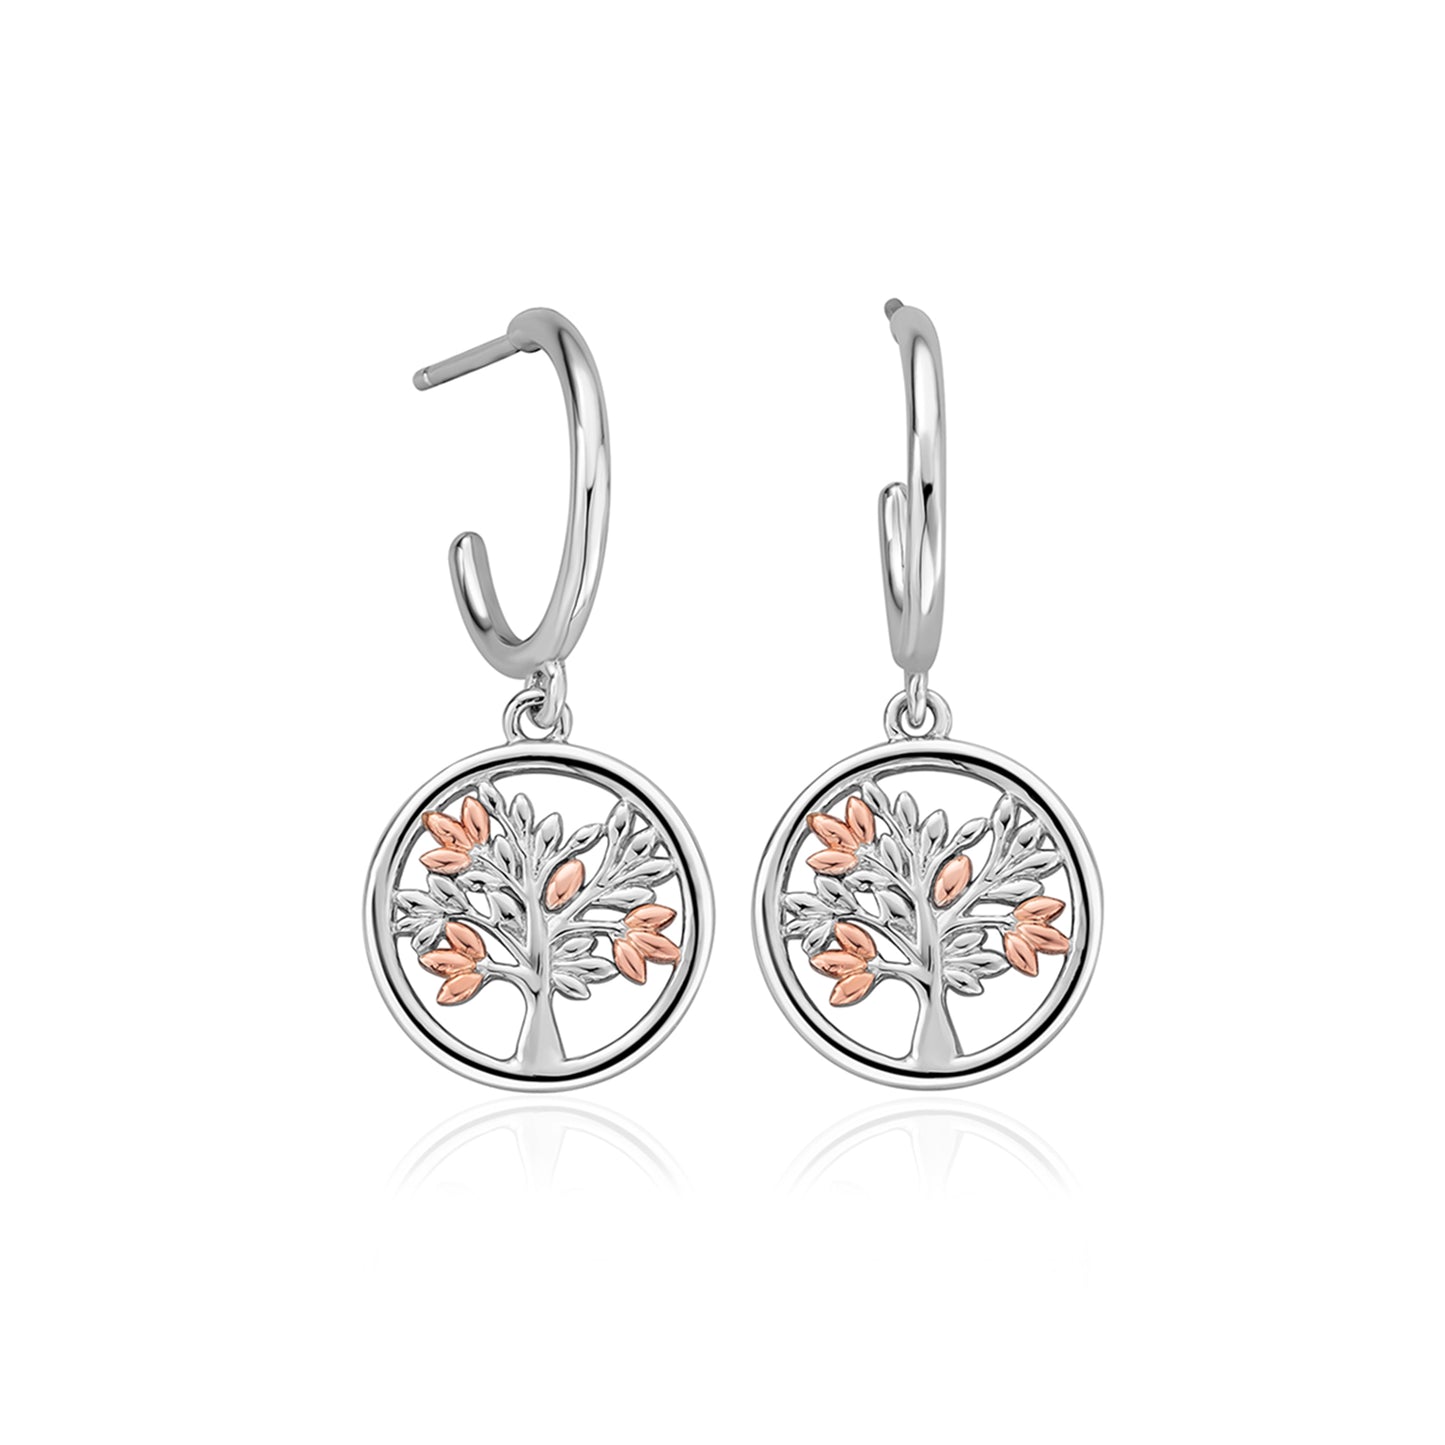 00016128 - Clogau Tree of Life Drop Earrings  - 3SNTLCDE